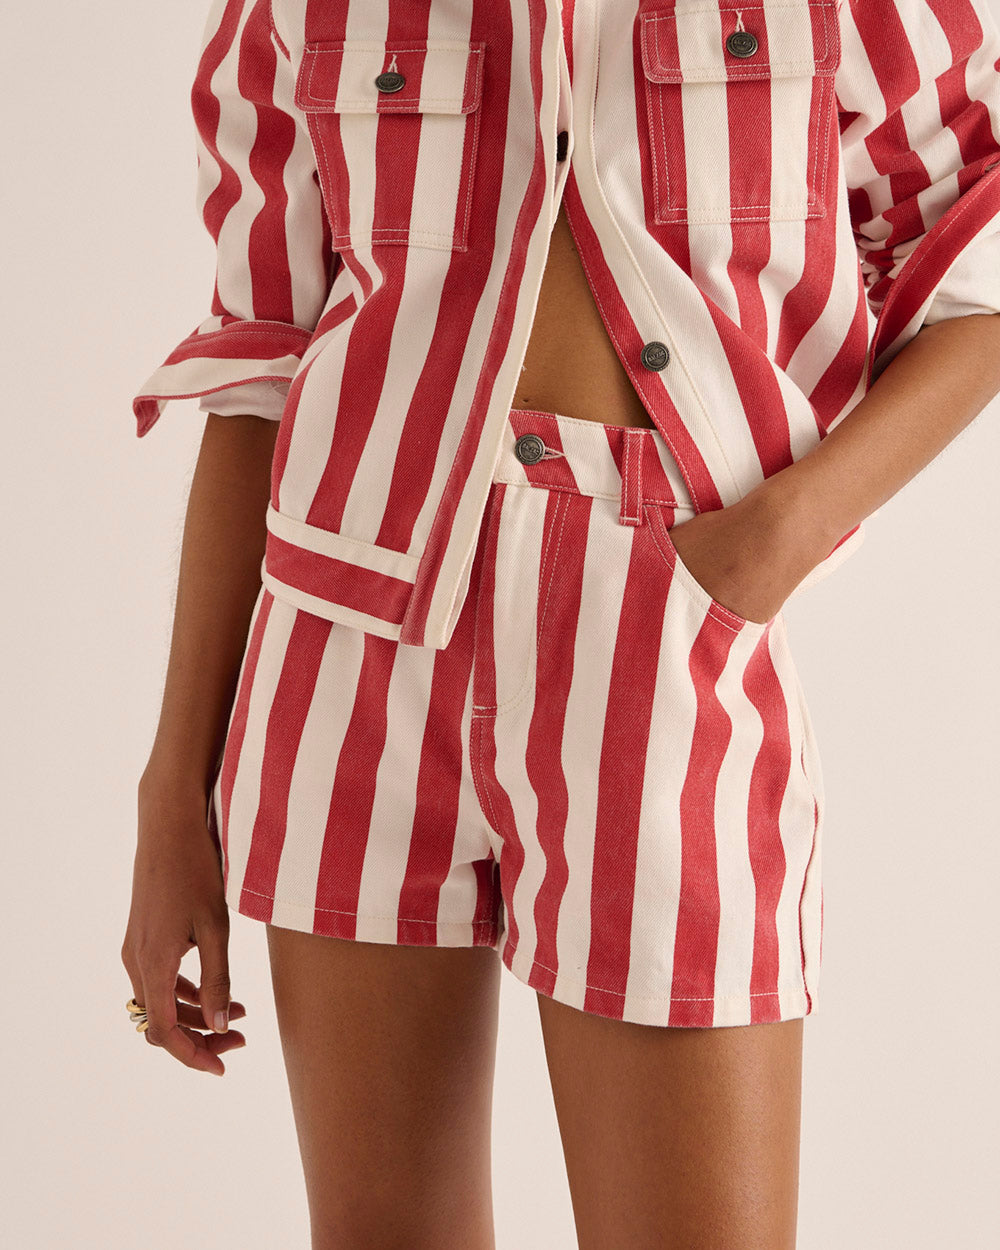 Triomphe red and white striped shorts